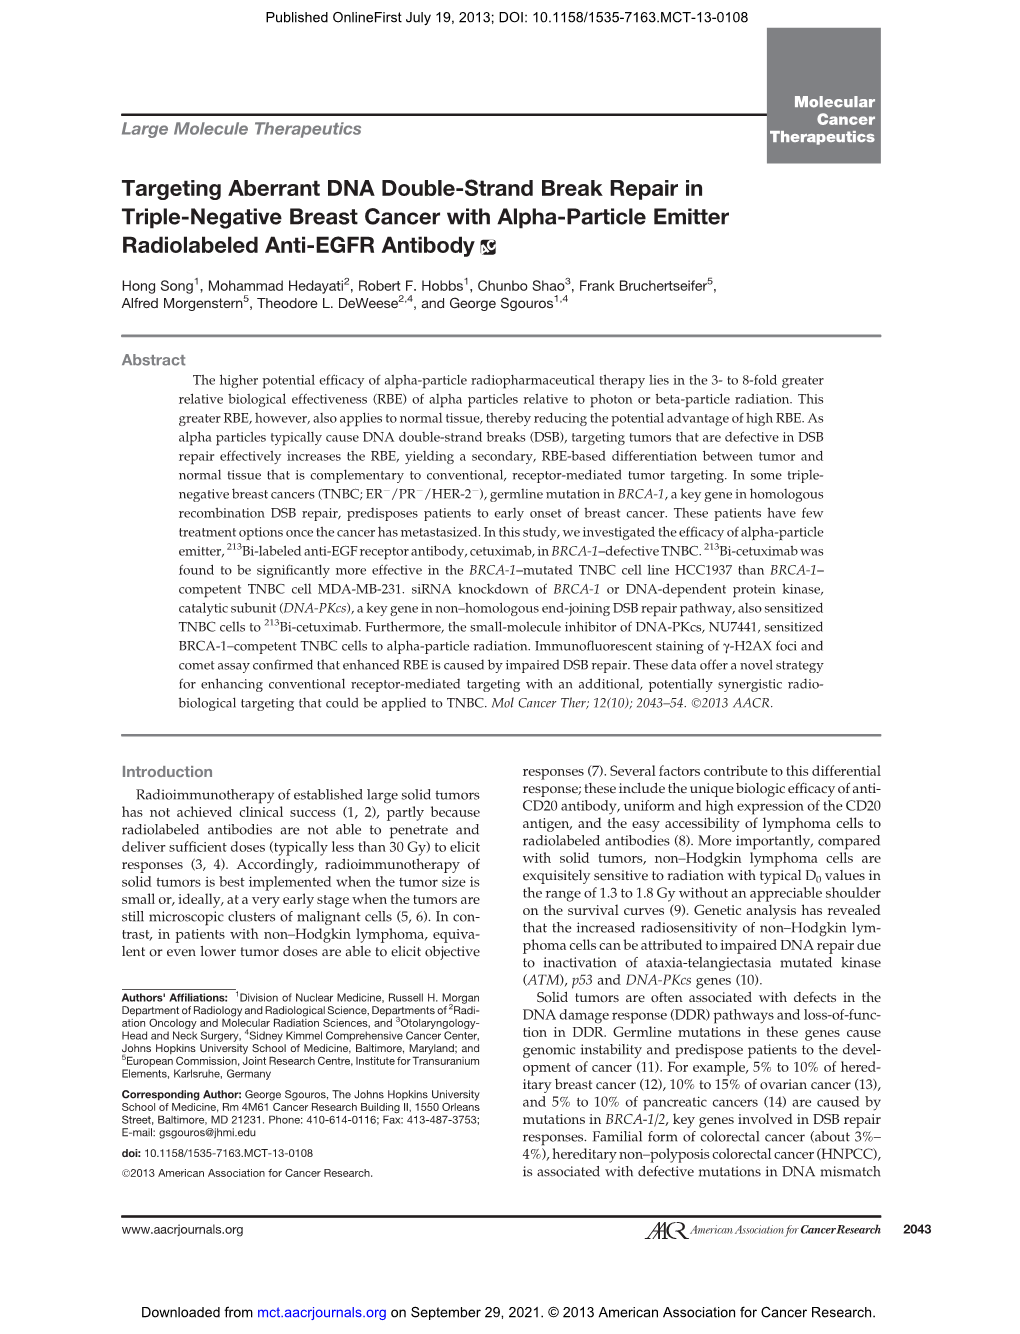 Targeting Aberrant DNA Double-Strand Break Repair in Triple-Negative Breast Cancer with Alpha-Particle Emitter Radiolabeled Anti-EGFR Antibody